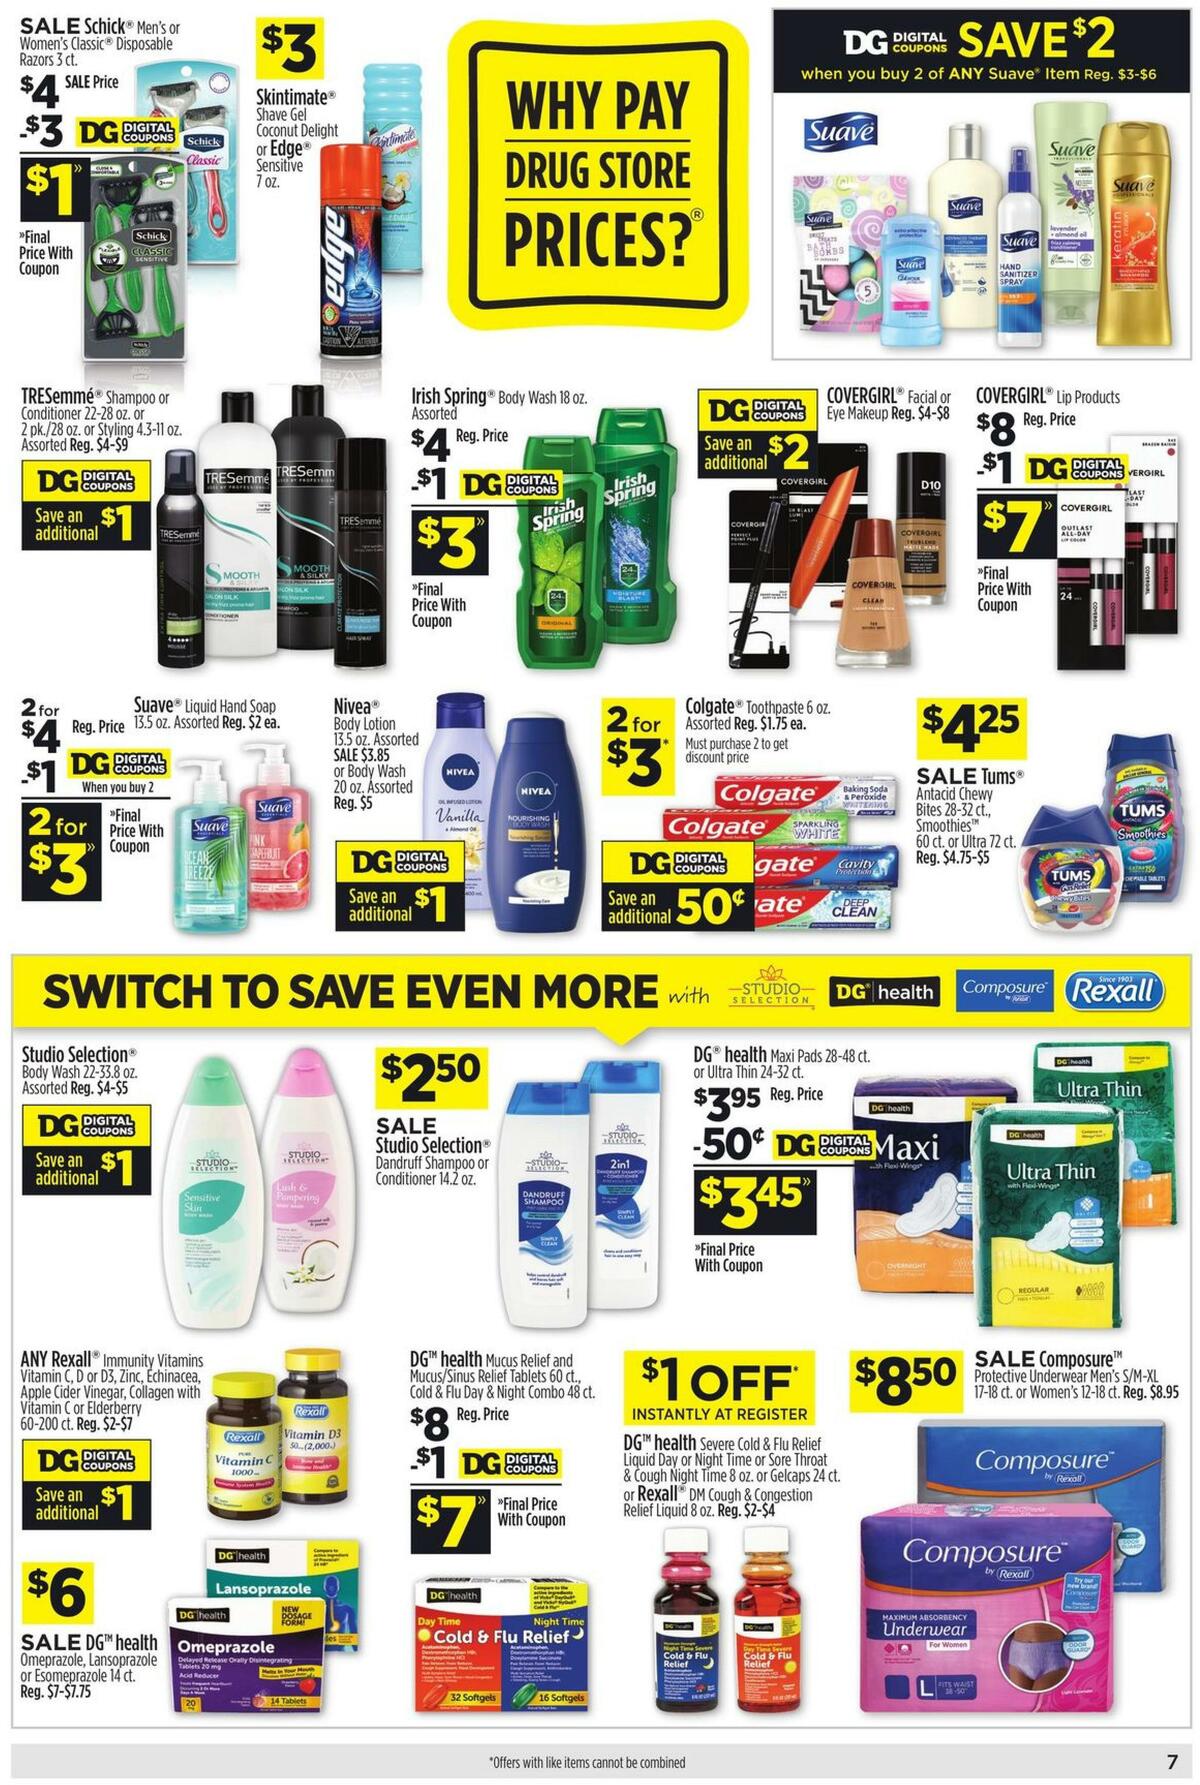 Dollar General Weekly Ad from January 24